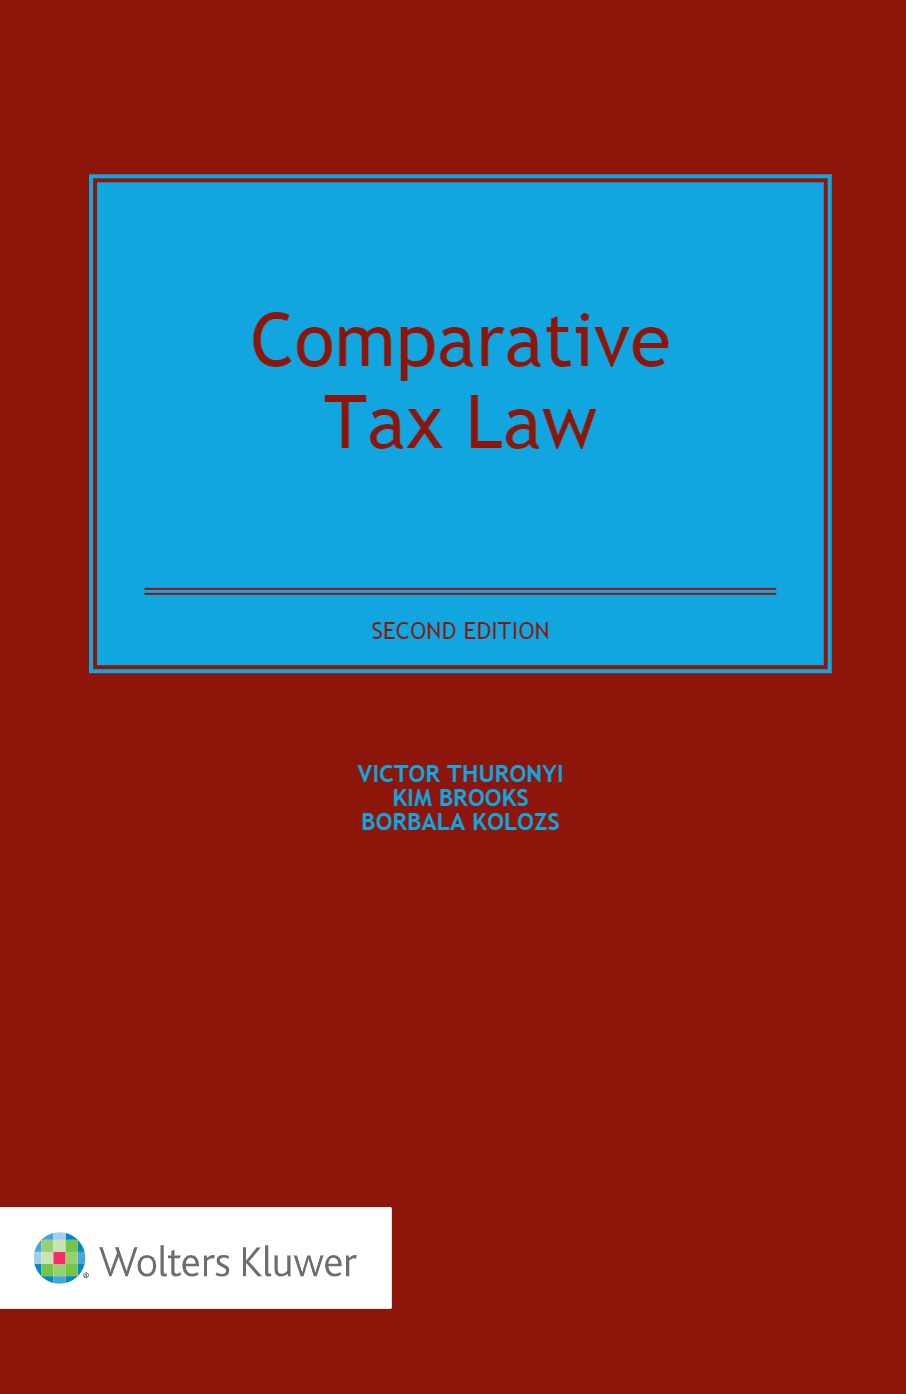 Comparative Tax Law, Second Edition